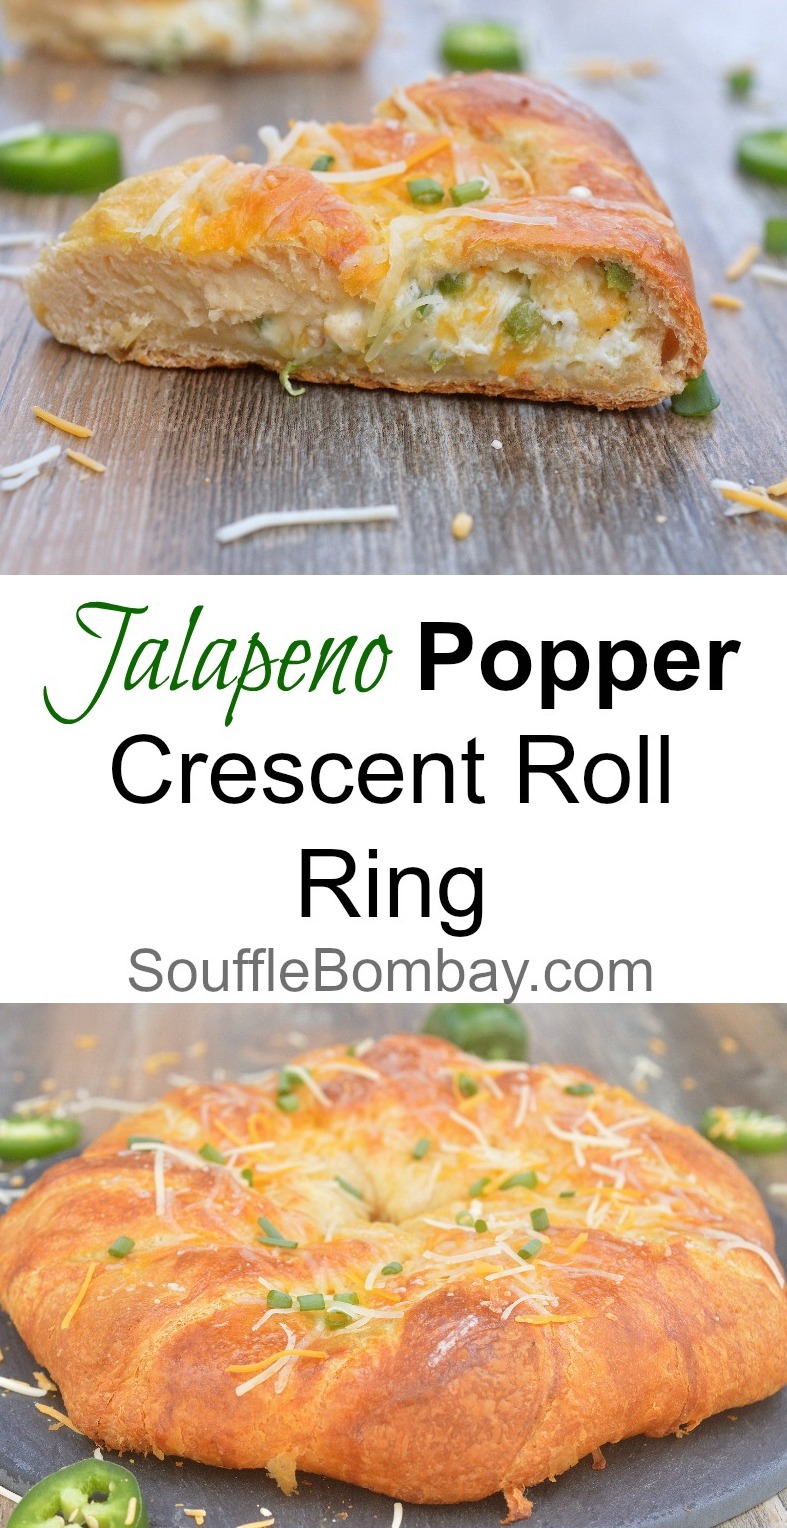 Jalapeno Popper Crescent Roll Ring